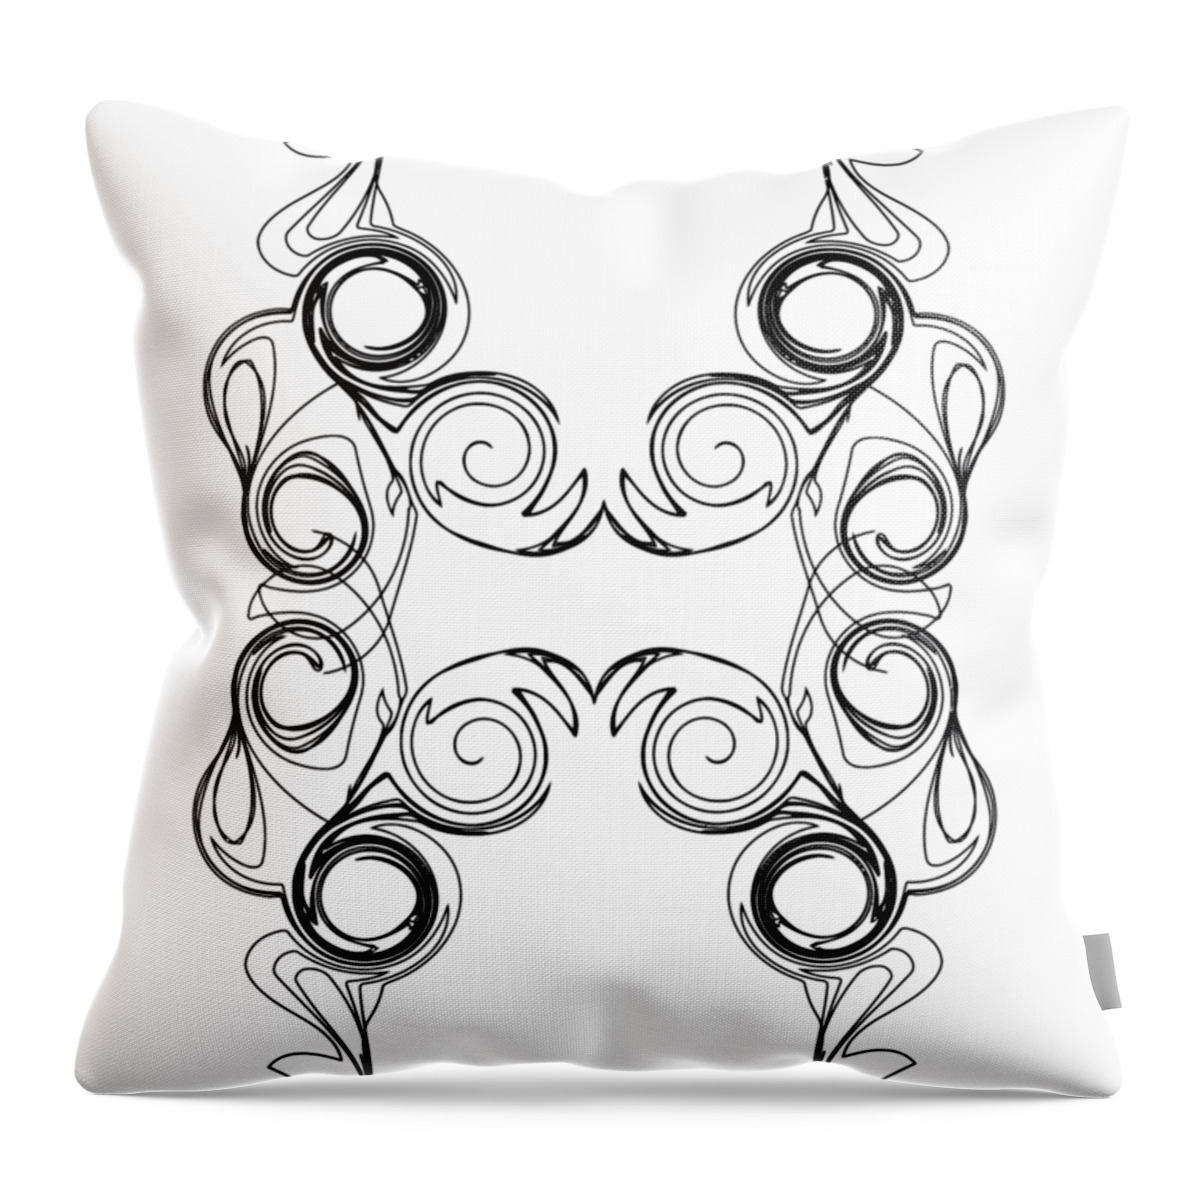 Ornate Curly Color Your Background Throw Pillow featuring the digital art Ornate Curly Color Your Background by Georgiana Romanovna